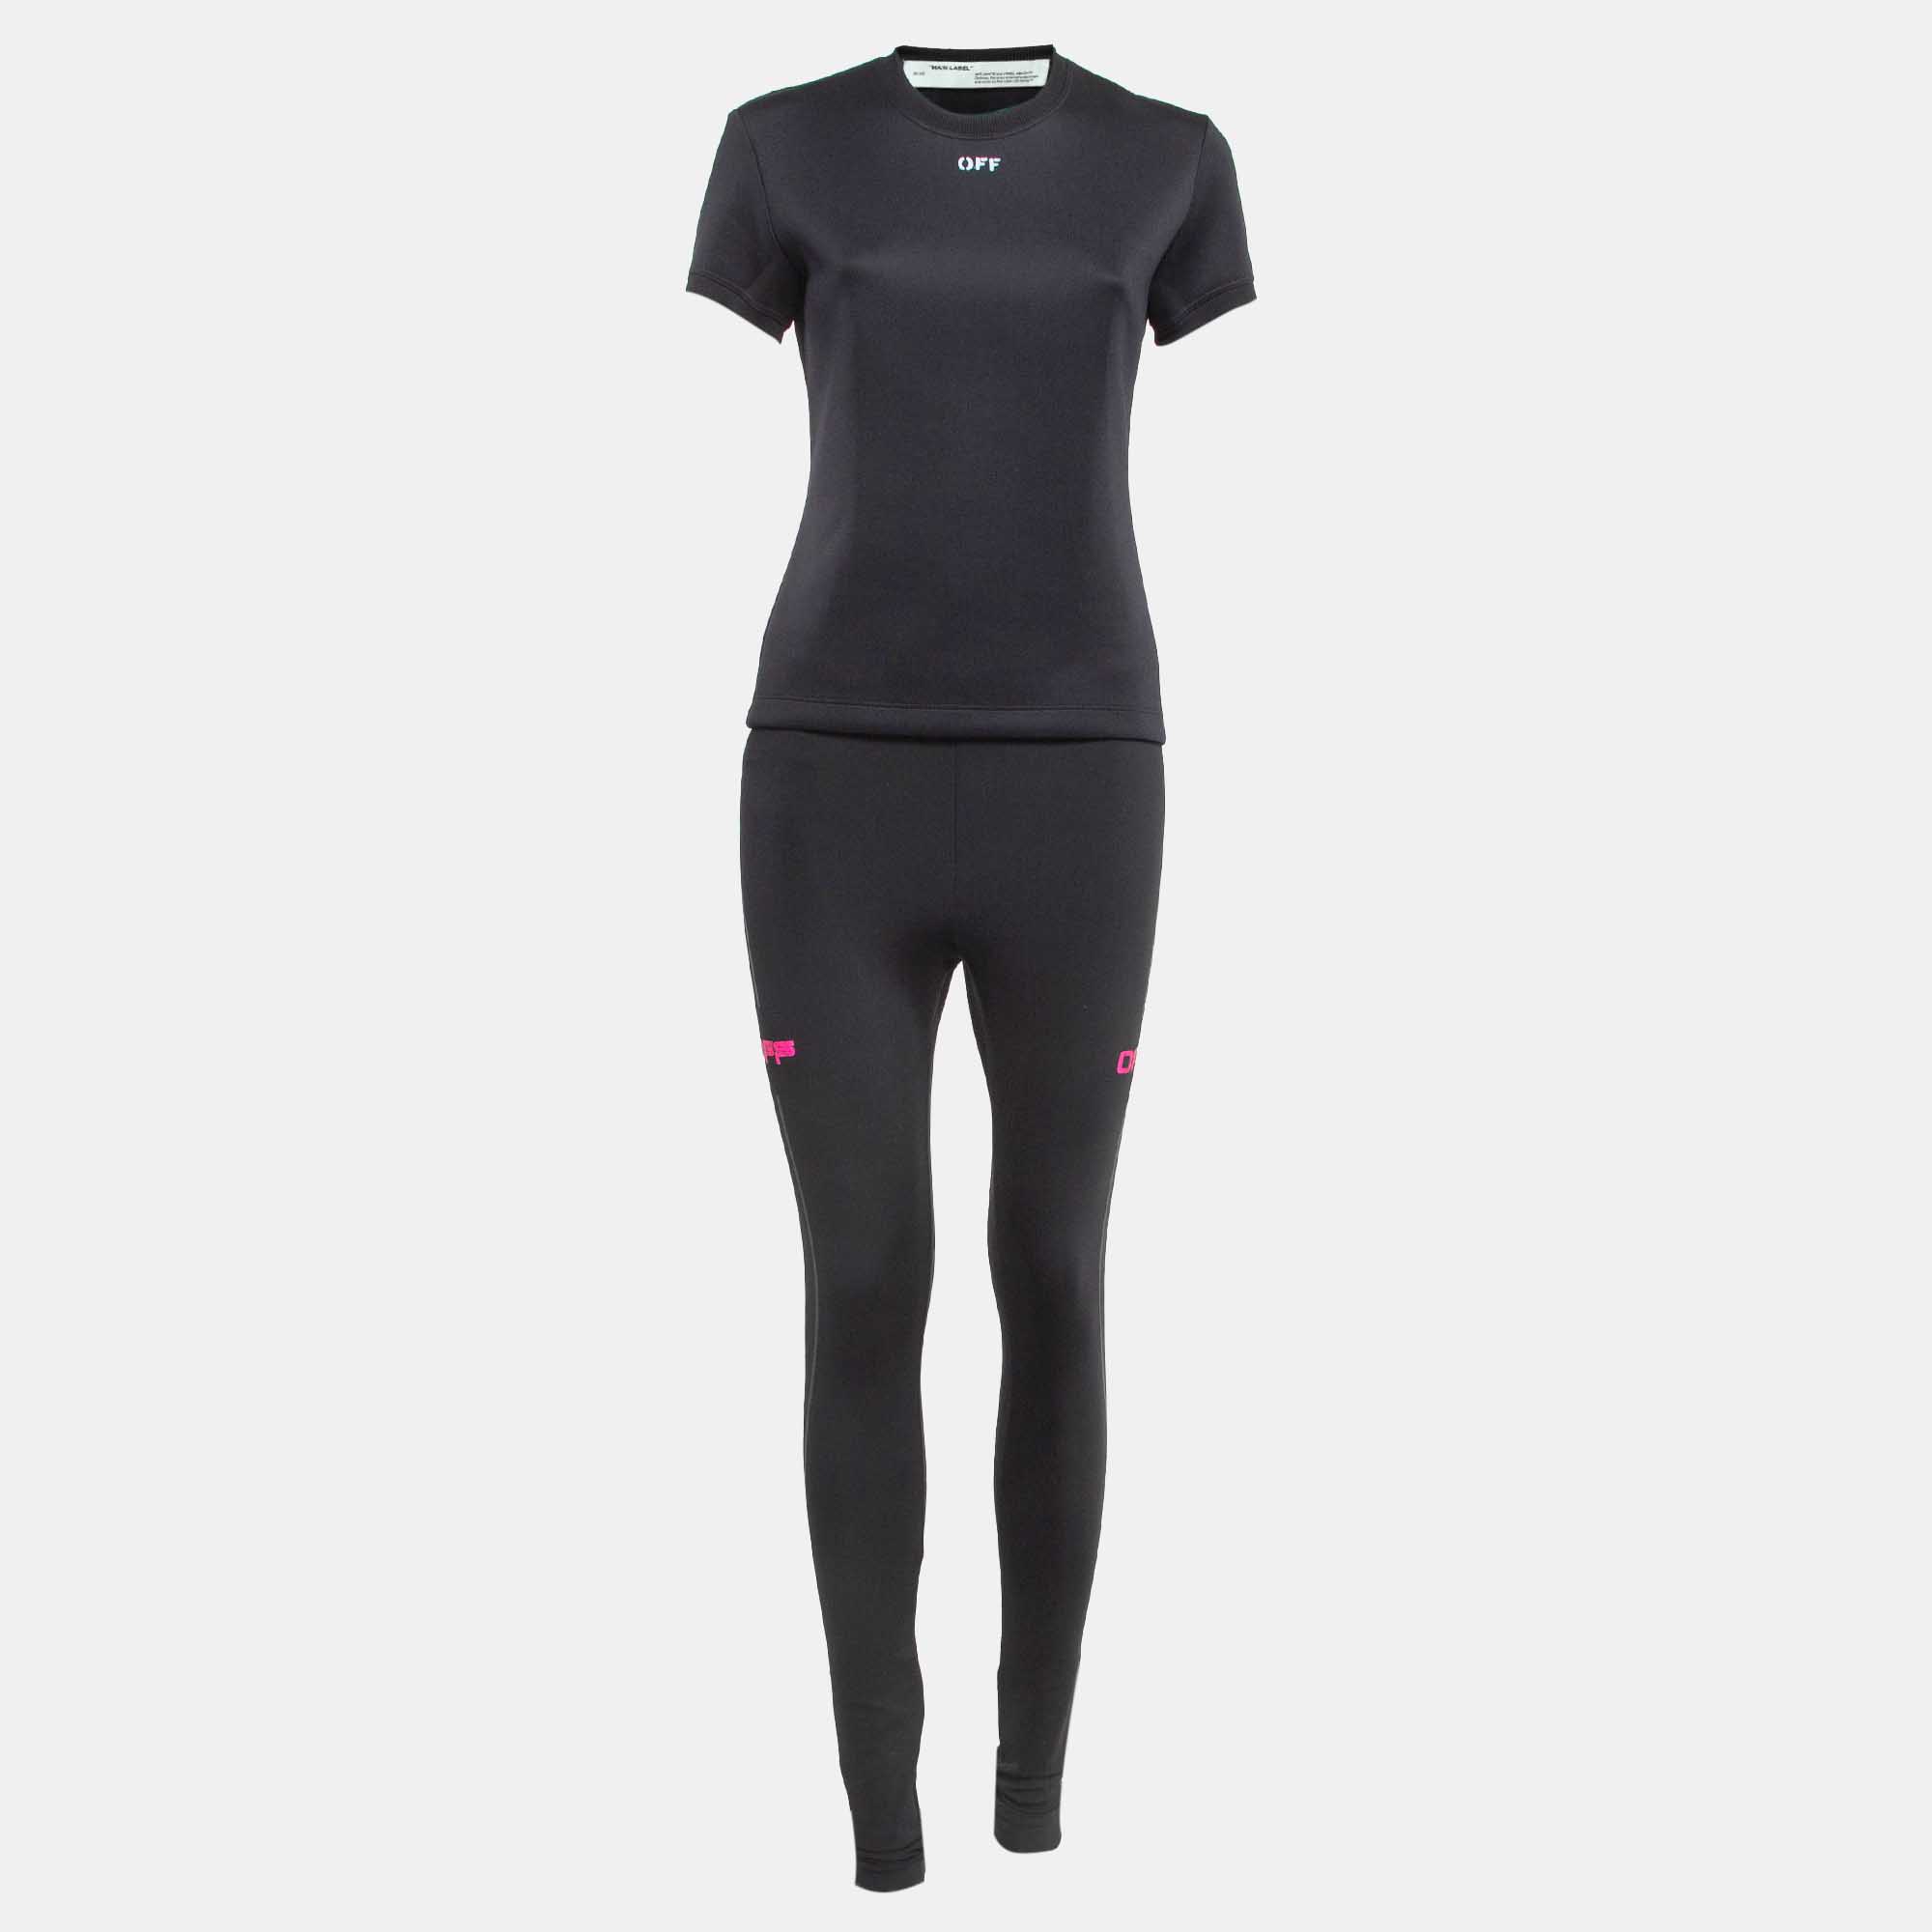 Off-white black jersey active wear t-shirt and leggings set s